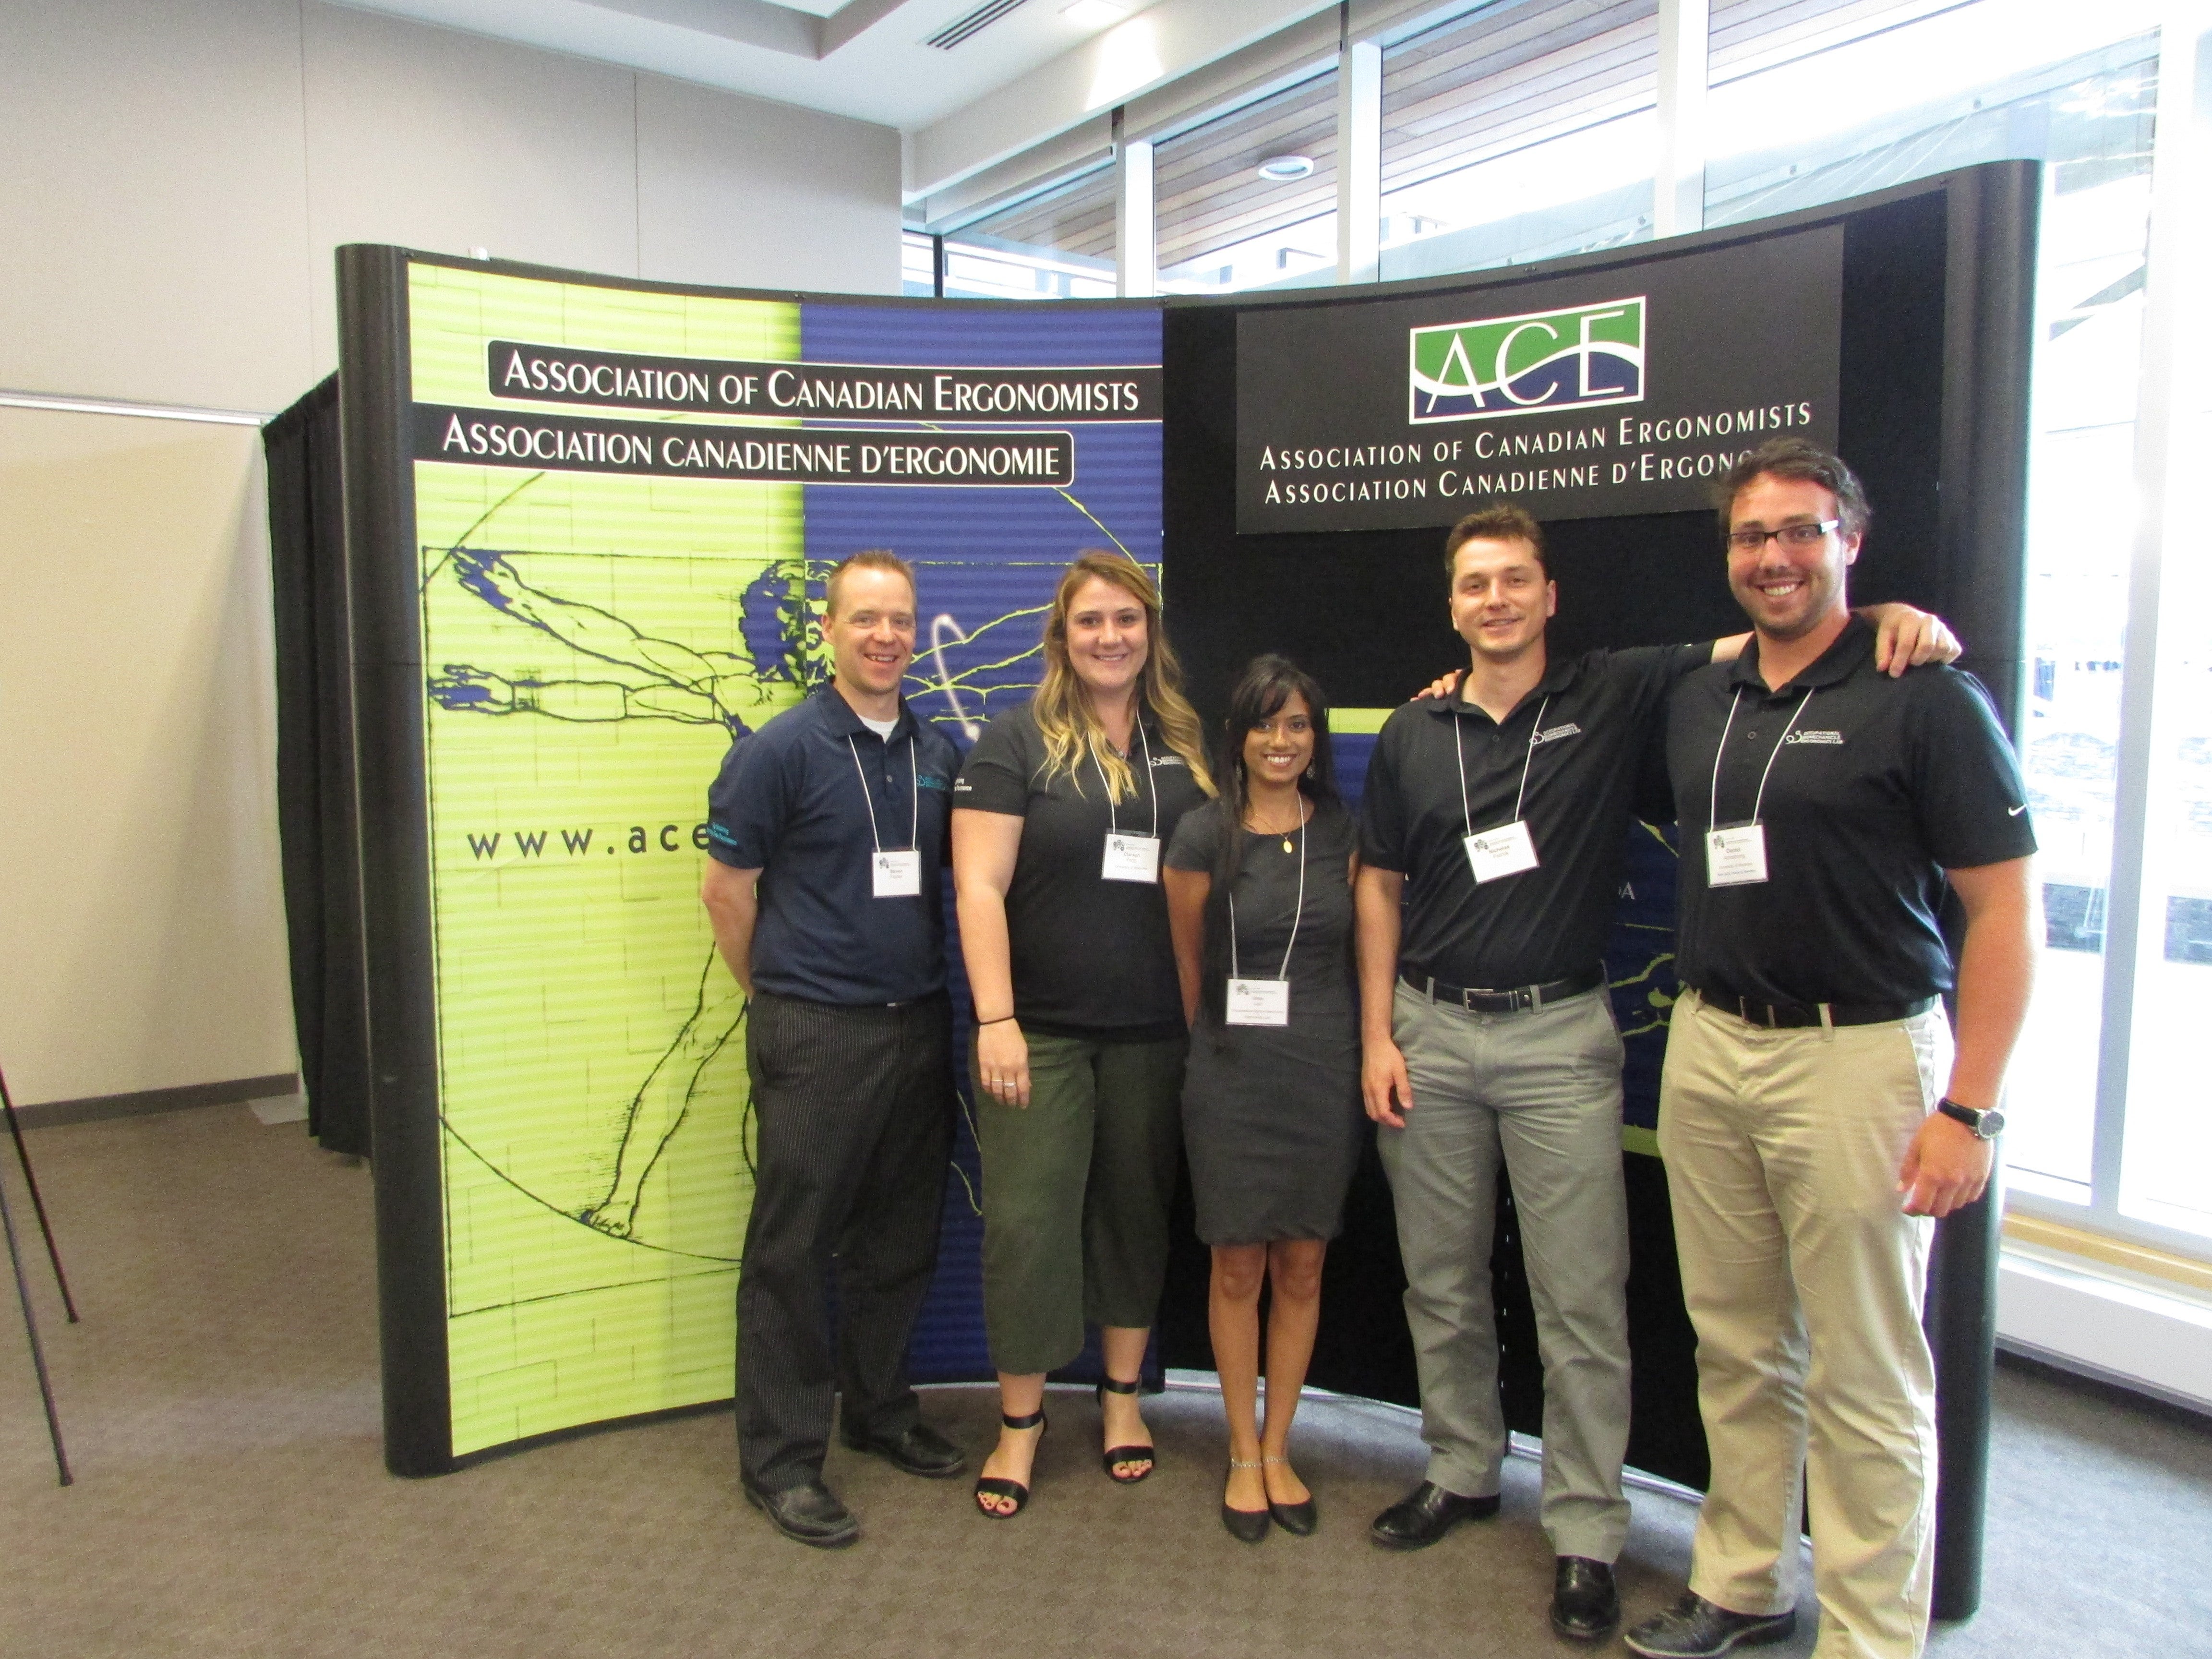 Lab members posing in front of the Association of Canadian Ergonomists banner